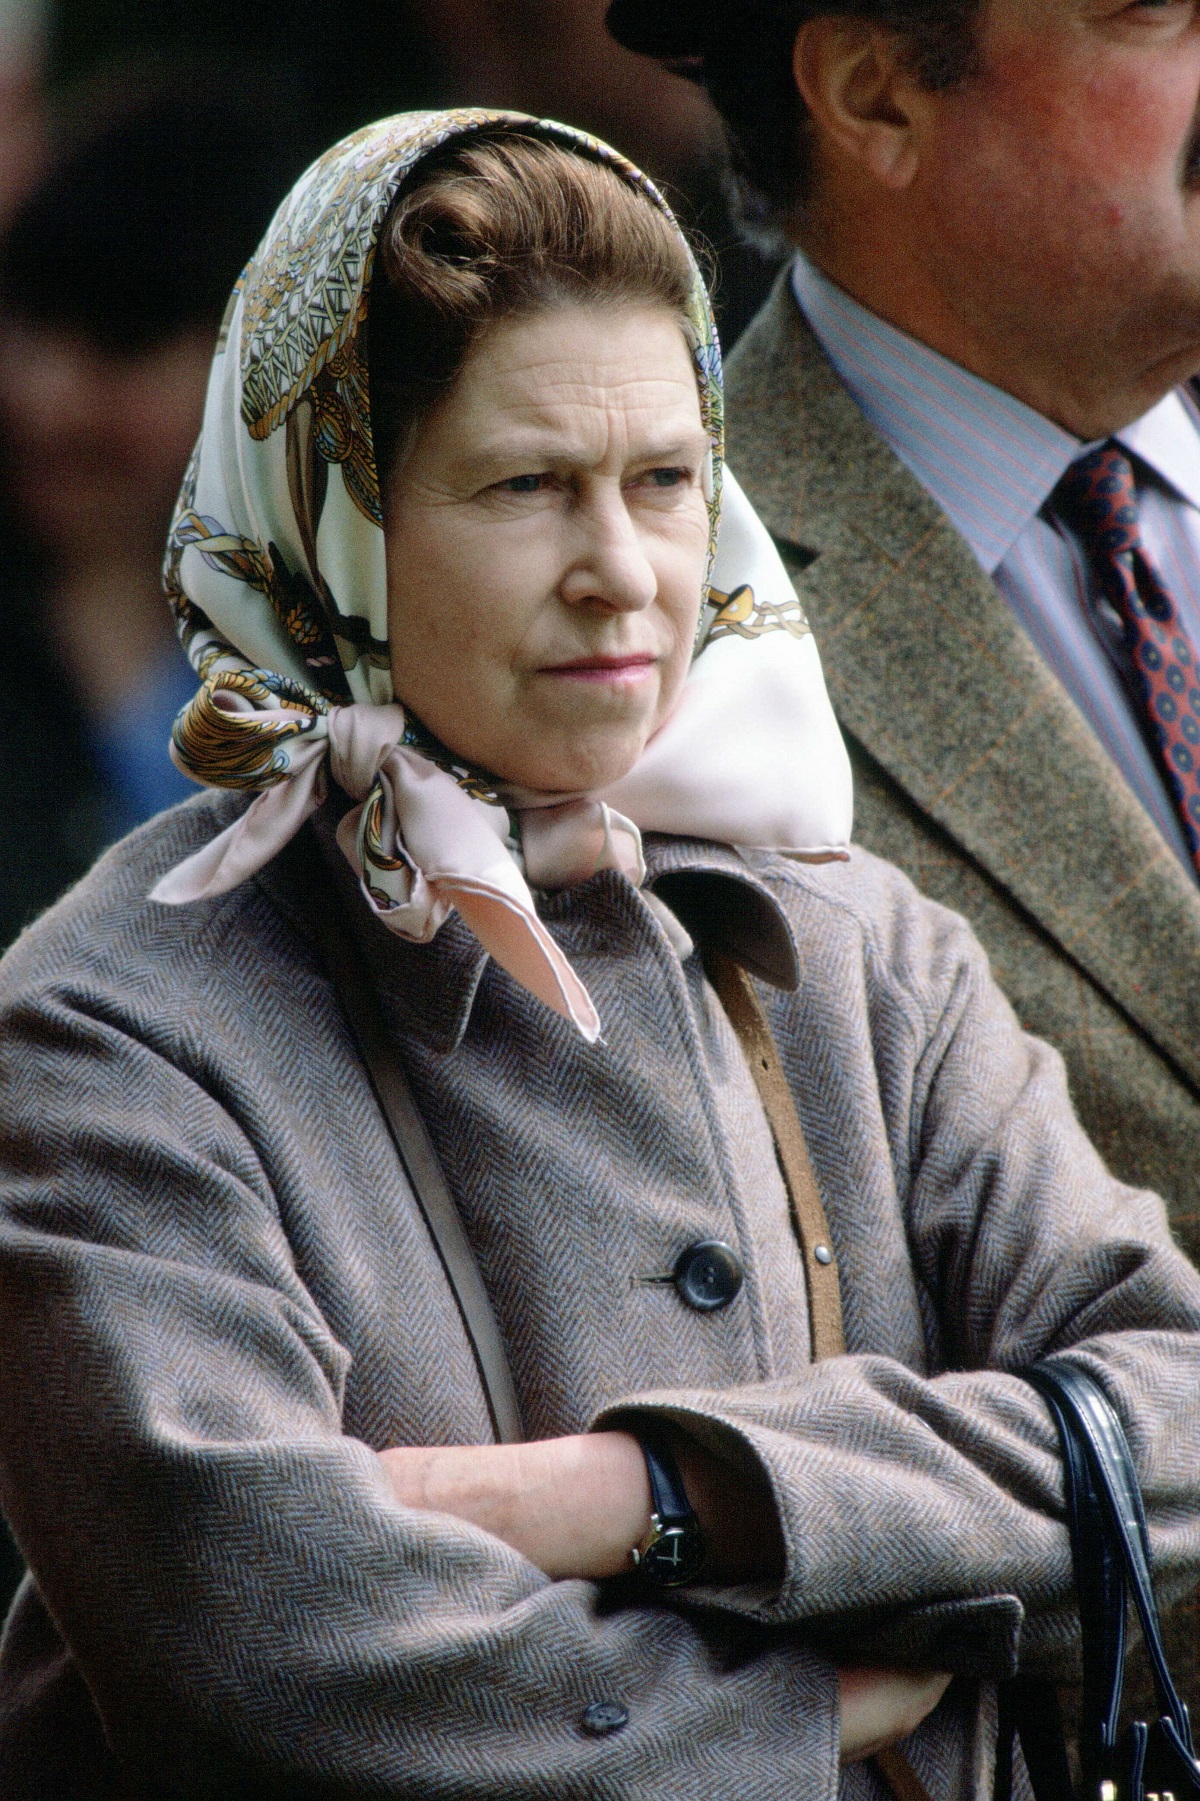 Queen Elizabeth watching event at the Royal Windsor Horse Show